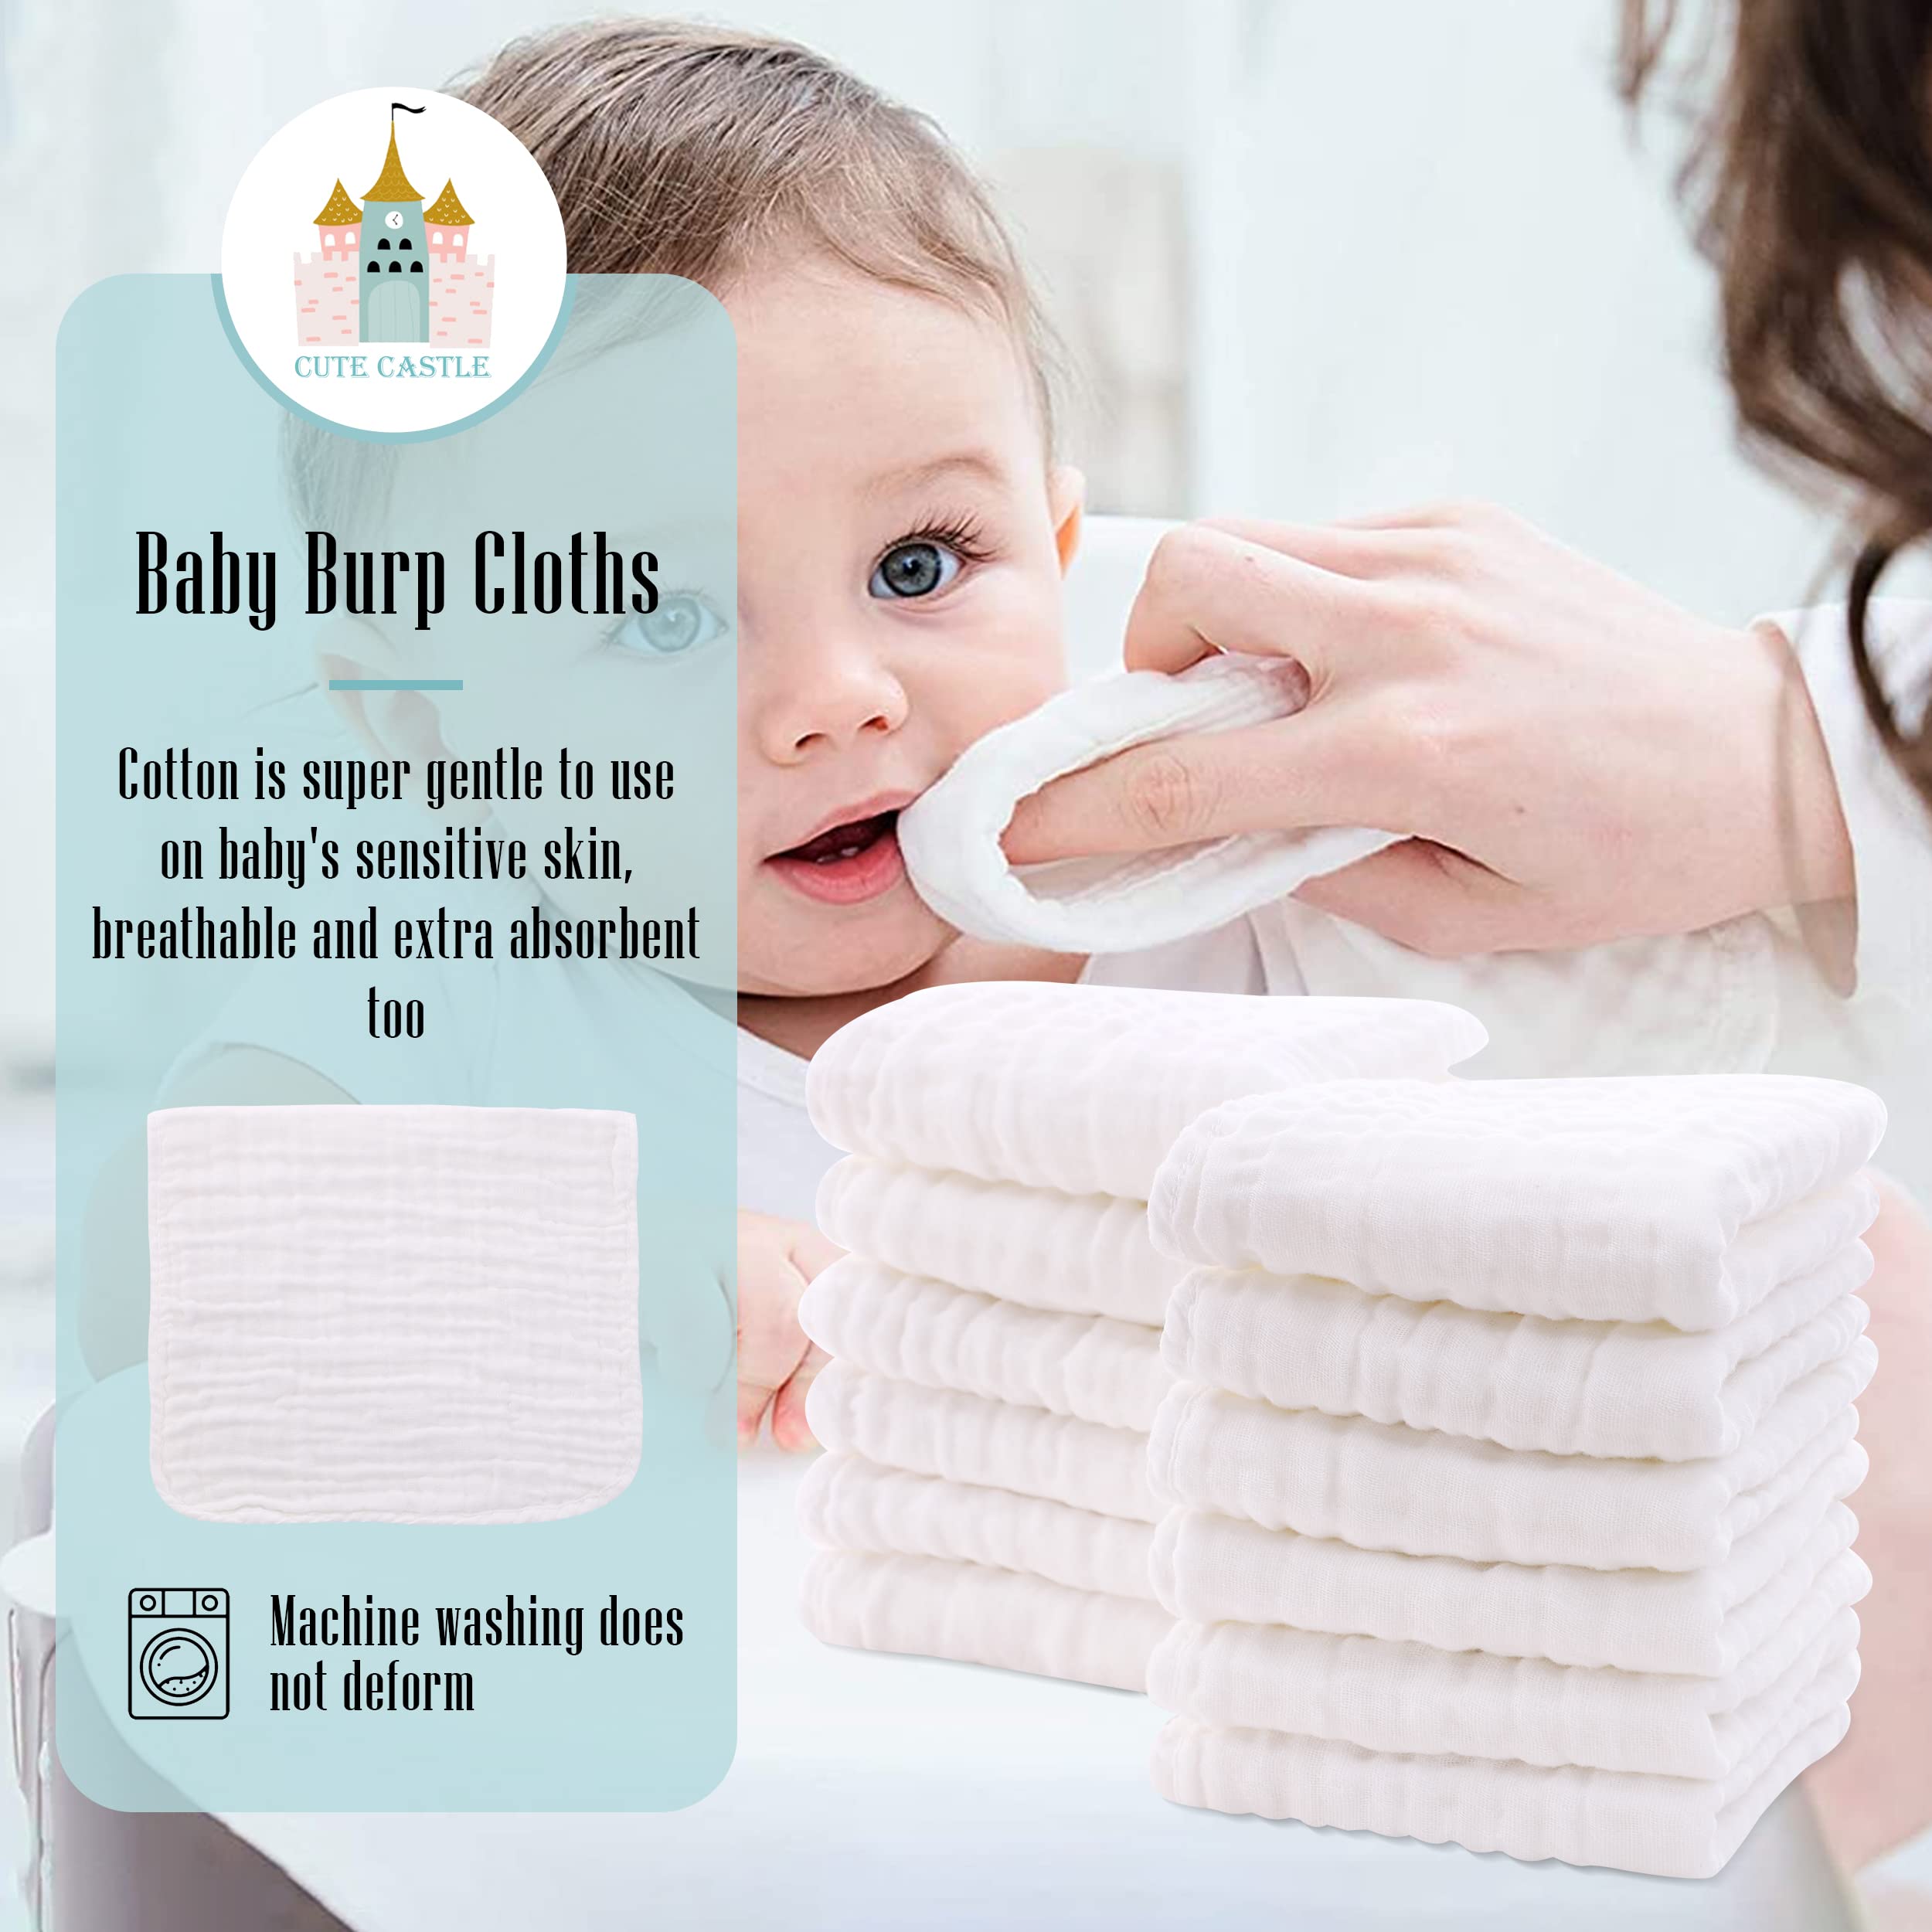 Cute Castle 12 Pack Muslin Burp Cloths for Baby - Ultra-Soft 100% Cotton Baby Washcloths - Large 20'' by 10'' Super Absorbent Milk Spit Up Rags - Burpy Cloths for Unisex, Boy, Girl - White